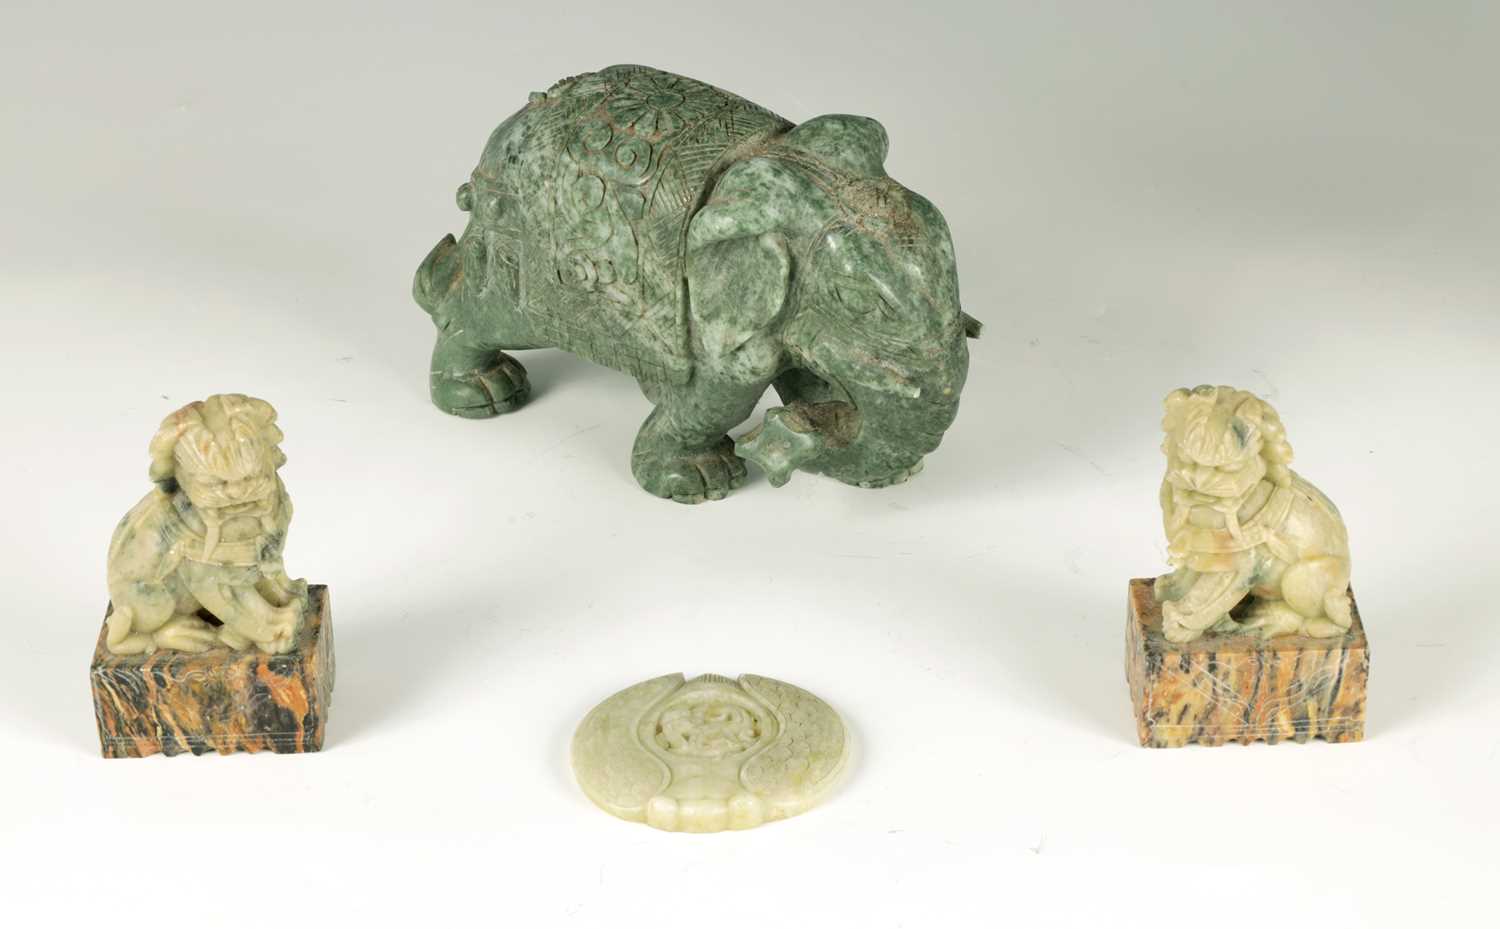 Lot 122 - A 20TH CENTURY LARGE CARVED SPINACH GREEN JADE ELEPHANT